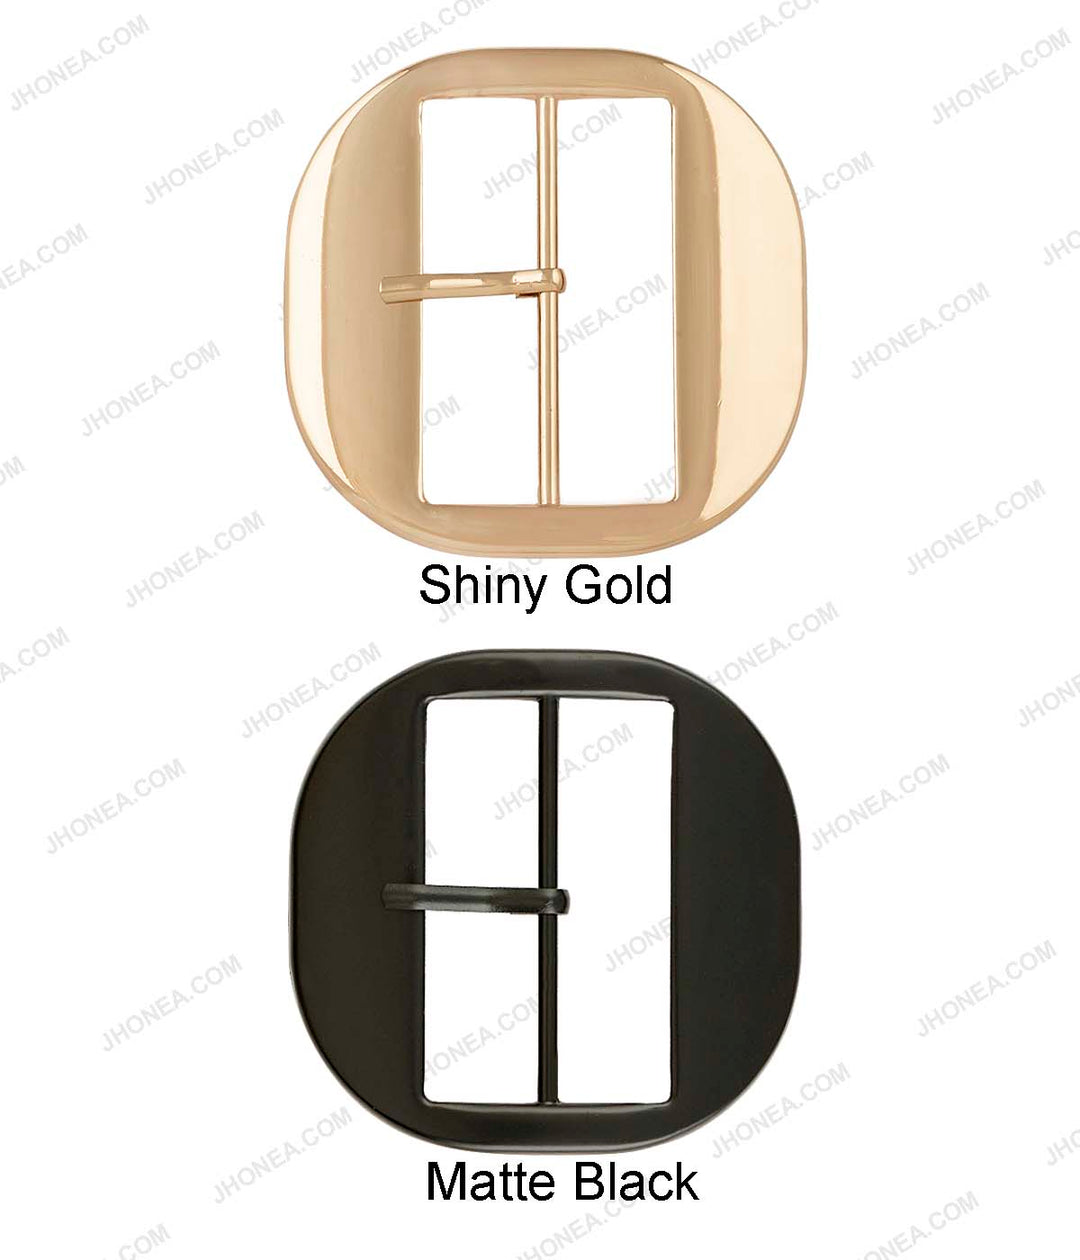 Shiny Gold/Matte Black Color Smooth Fancy Rounded Square Frame Belt Buckle with Prong